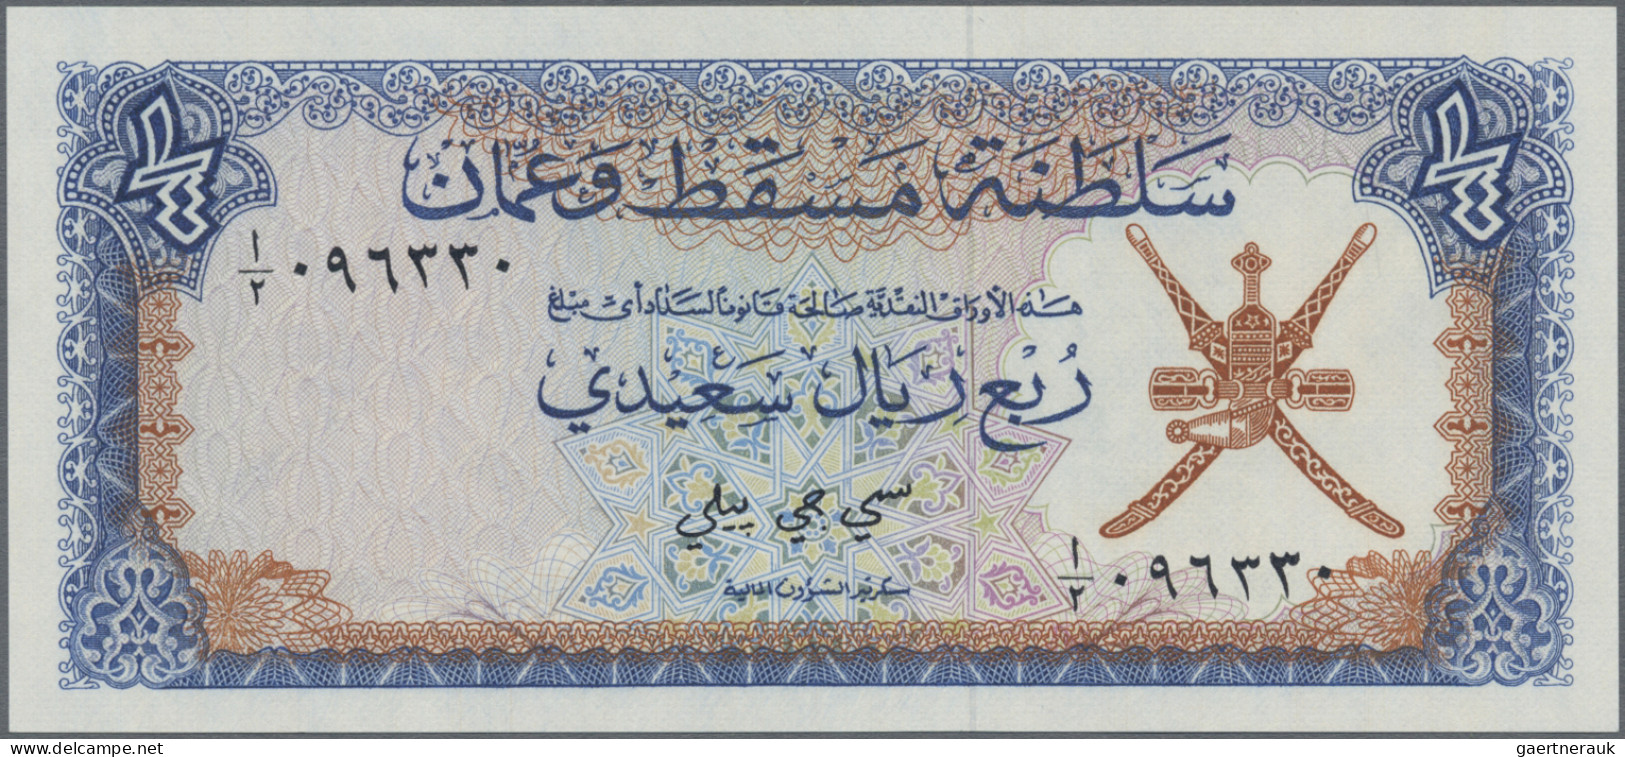 Oman: Sultanate of Muscat and Oman and Oman Currency Board, lot with 5 banknotes